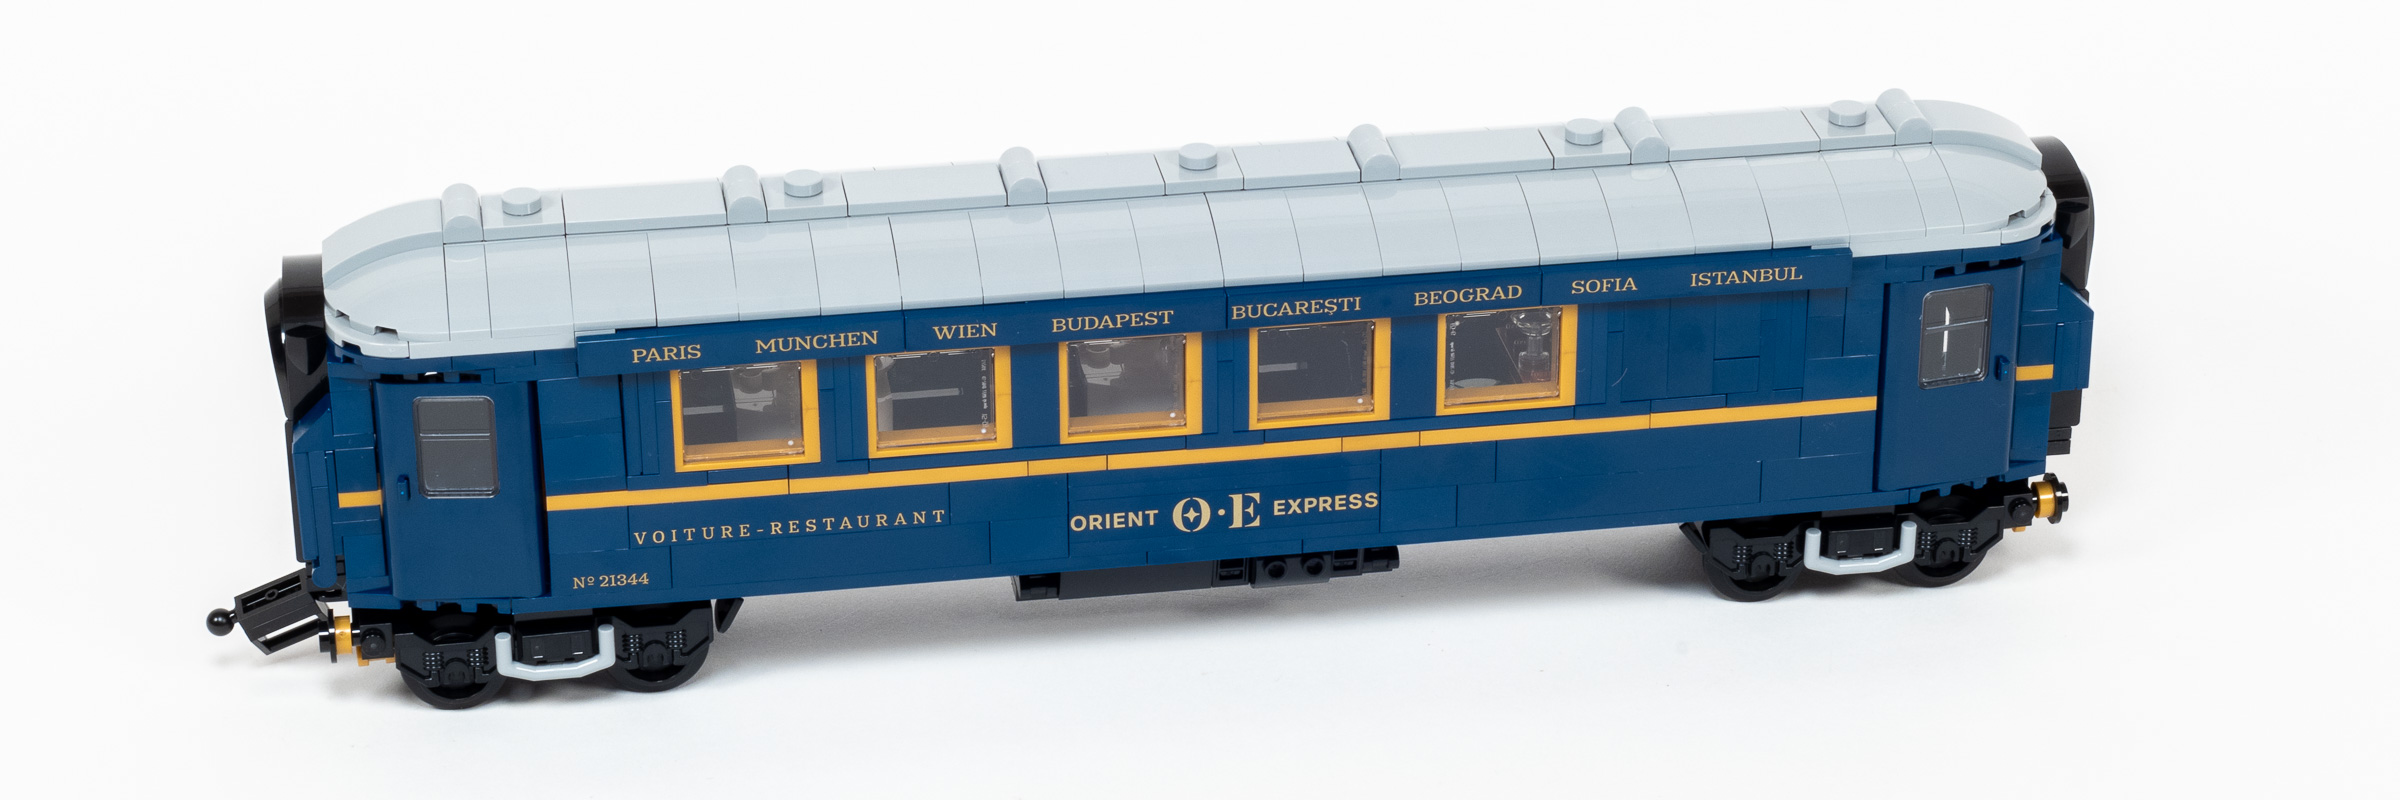 Review: LEGO 21344 The Orient Express - Jay's Brick Blog